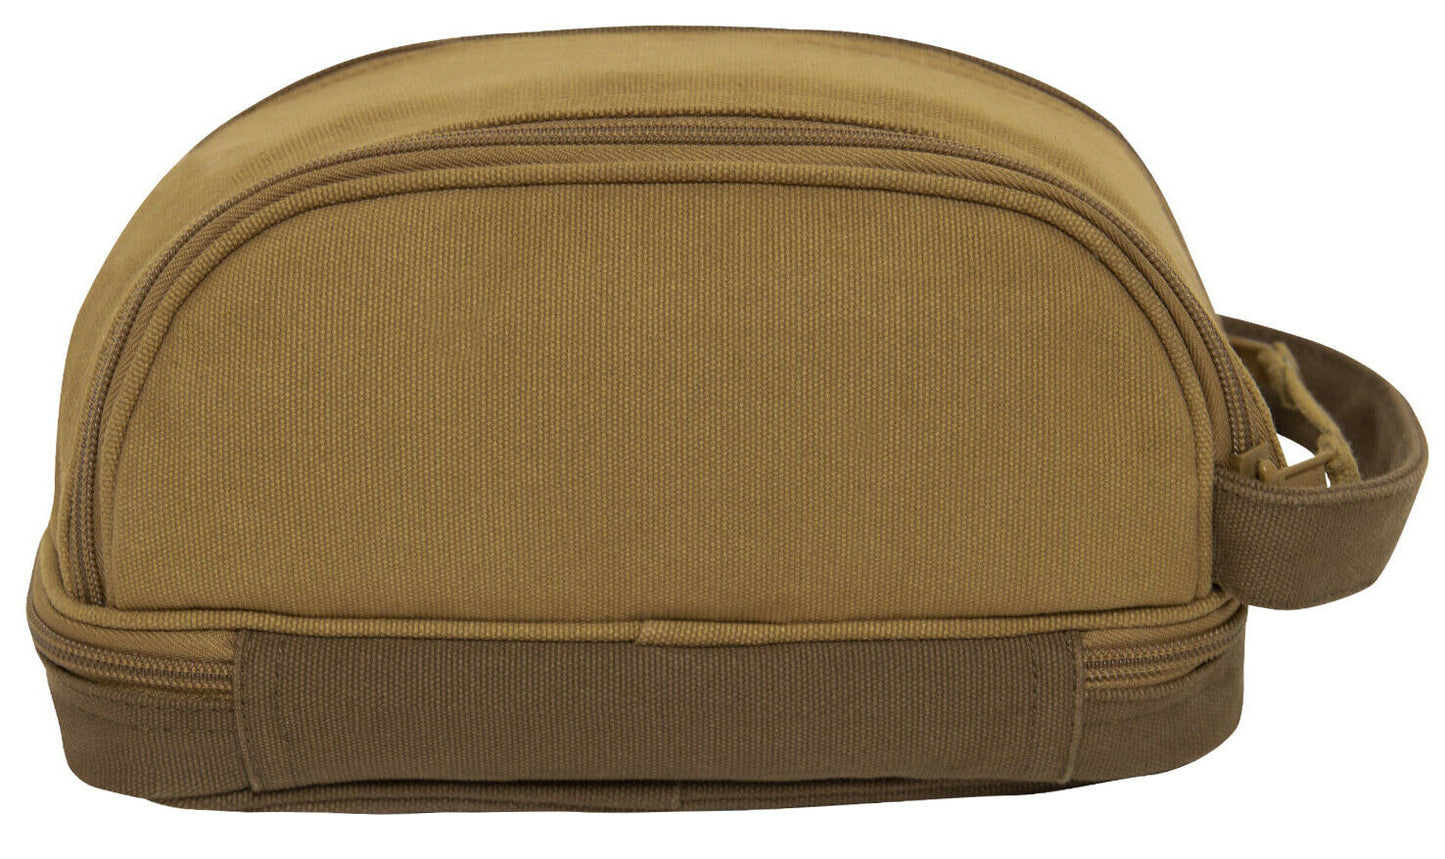 Rothco Deluxe Canvas Travel Toiletry Kit